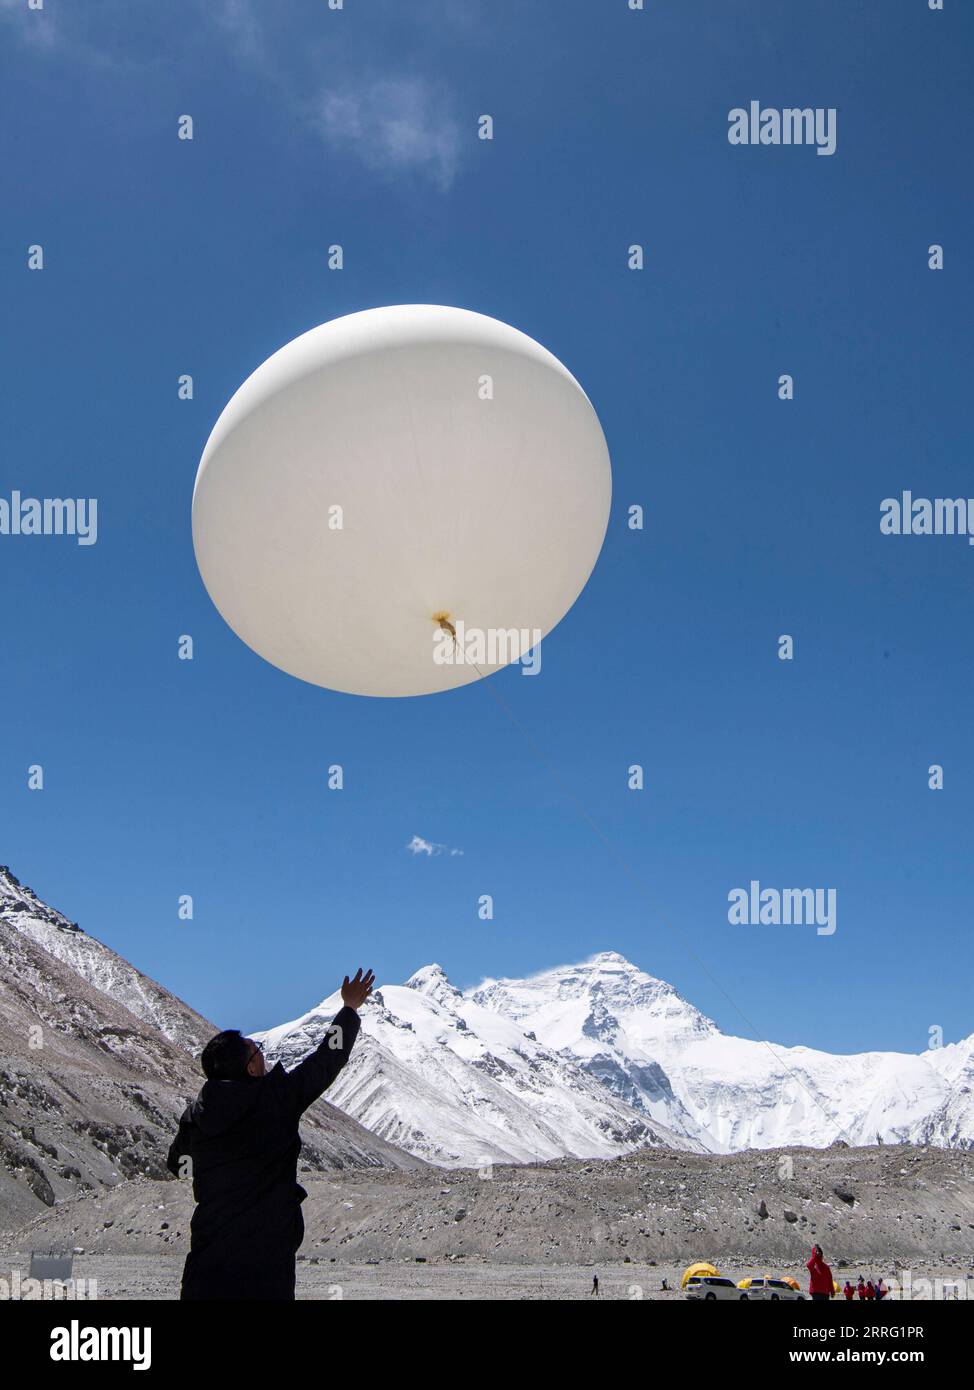 220503 -- MOUNT QOMOLANGMA BASE CAMP, May 3, 2022 -- A scientific research member launches a weather balloon at the Mount Qomolangma base camp on May 3, 2022. China has started a new comprehensive scientific expedition on Mount Qomolangma, the world s highest peak on the China-Nepal border. Weather factors such as temperature, wind speed and humidity will directly affect the completion of scientific research tasks and the safety of research personnel at high altitude. Therefore, a meteorological support team has been launched in safeguards of the scientific expedition. The team is composed of Stock Photo